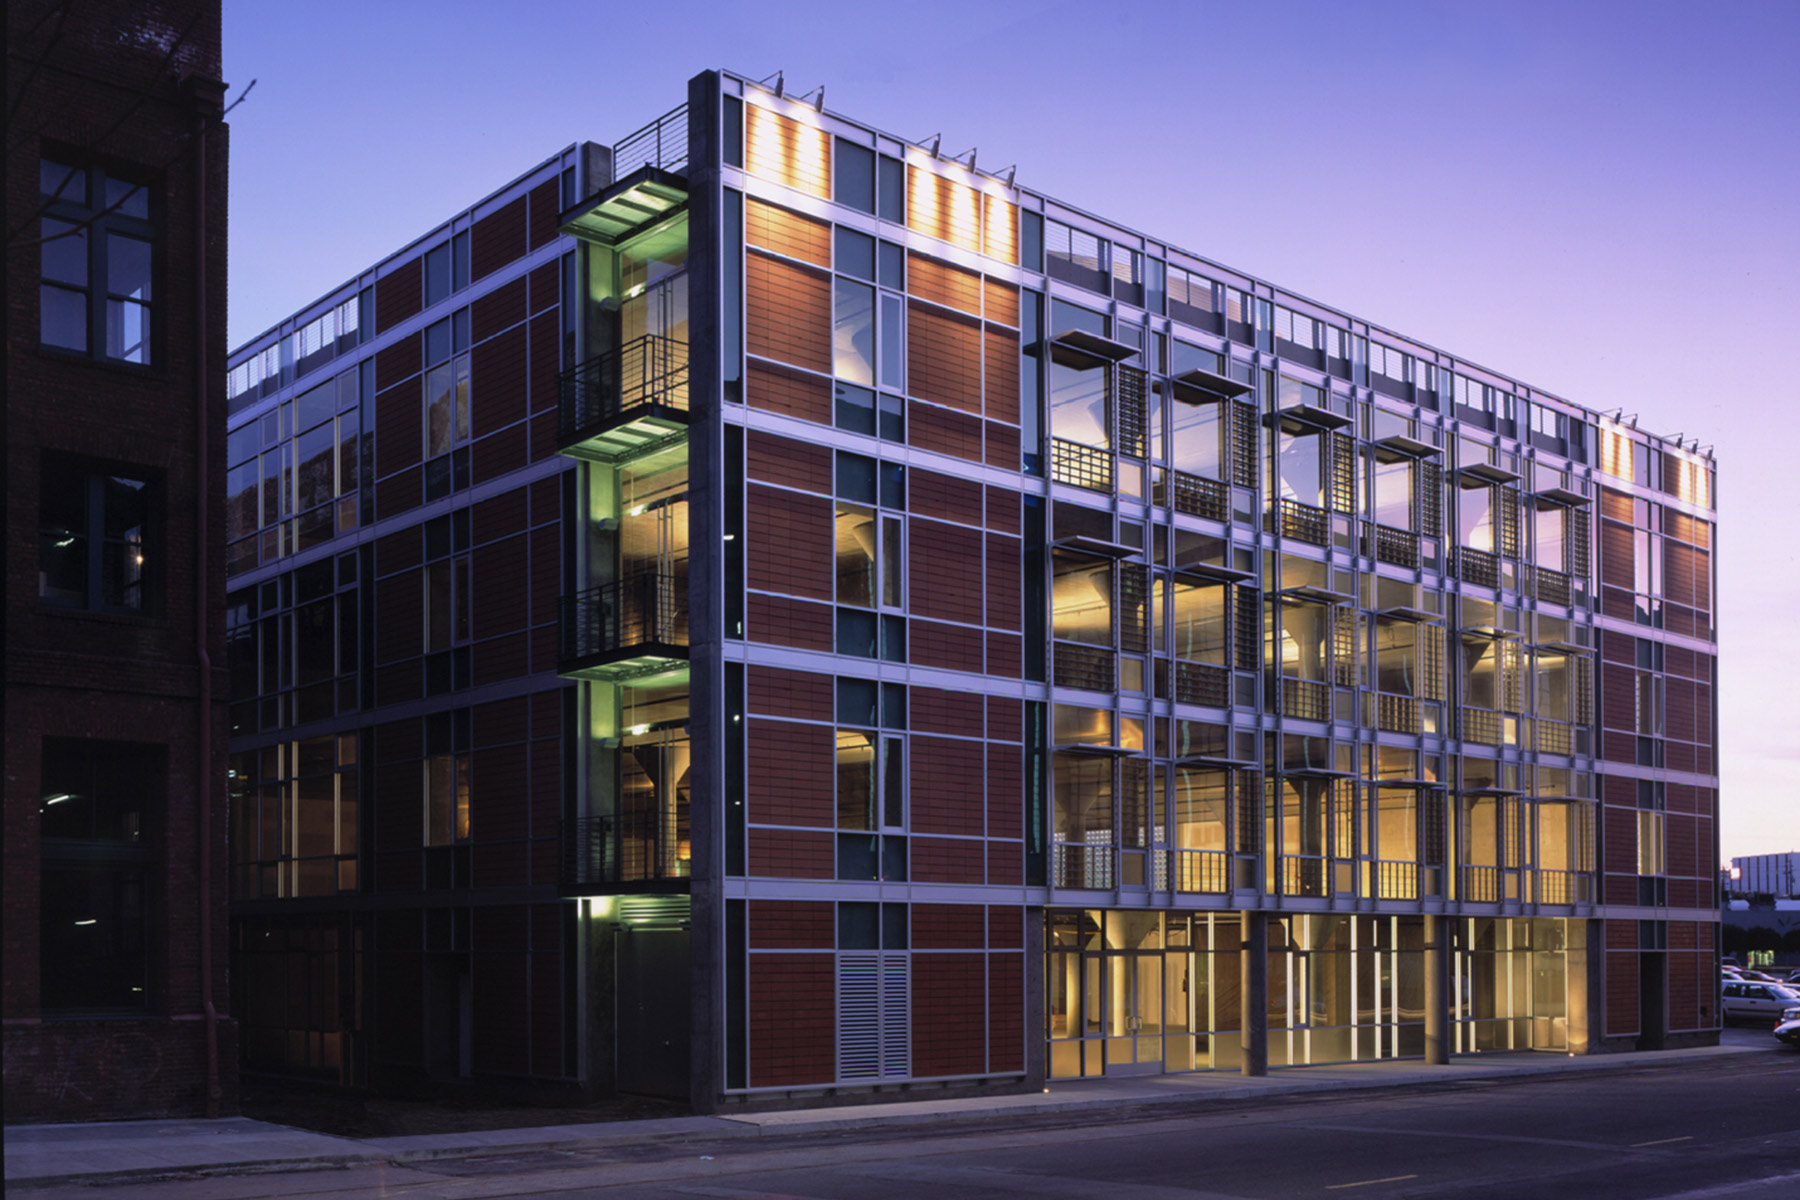 The historic Baker and Hamilton building in the South of Market neighborhood in San Francisco was renovated to include modern office workspaces, along with the addition to the new office building at 625 Townsend, creating a juxtaposition between the past and the present, and a contemporary reinterpretation of the warehouse district.